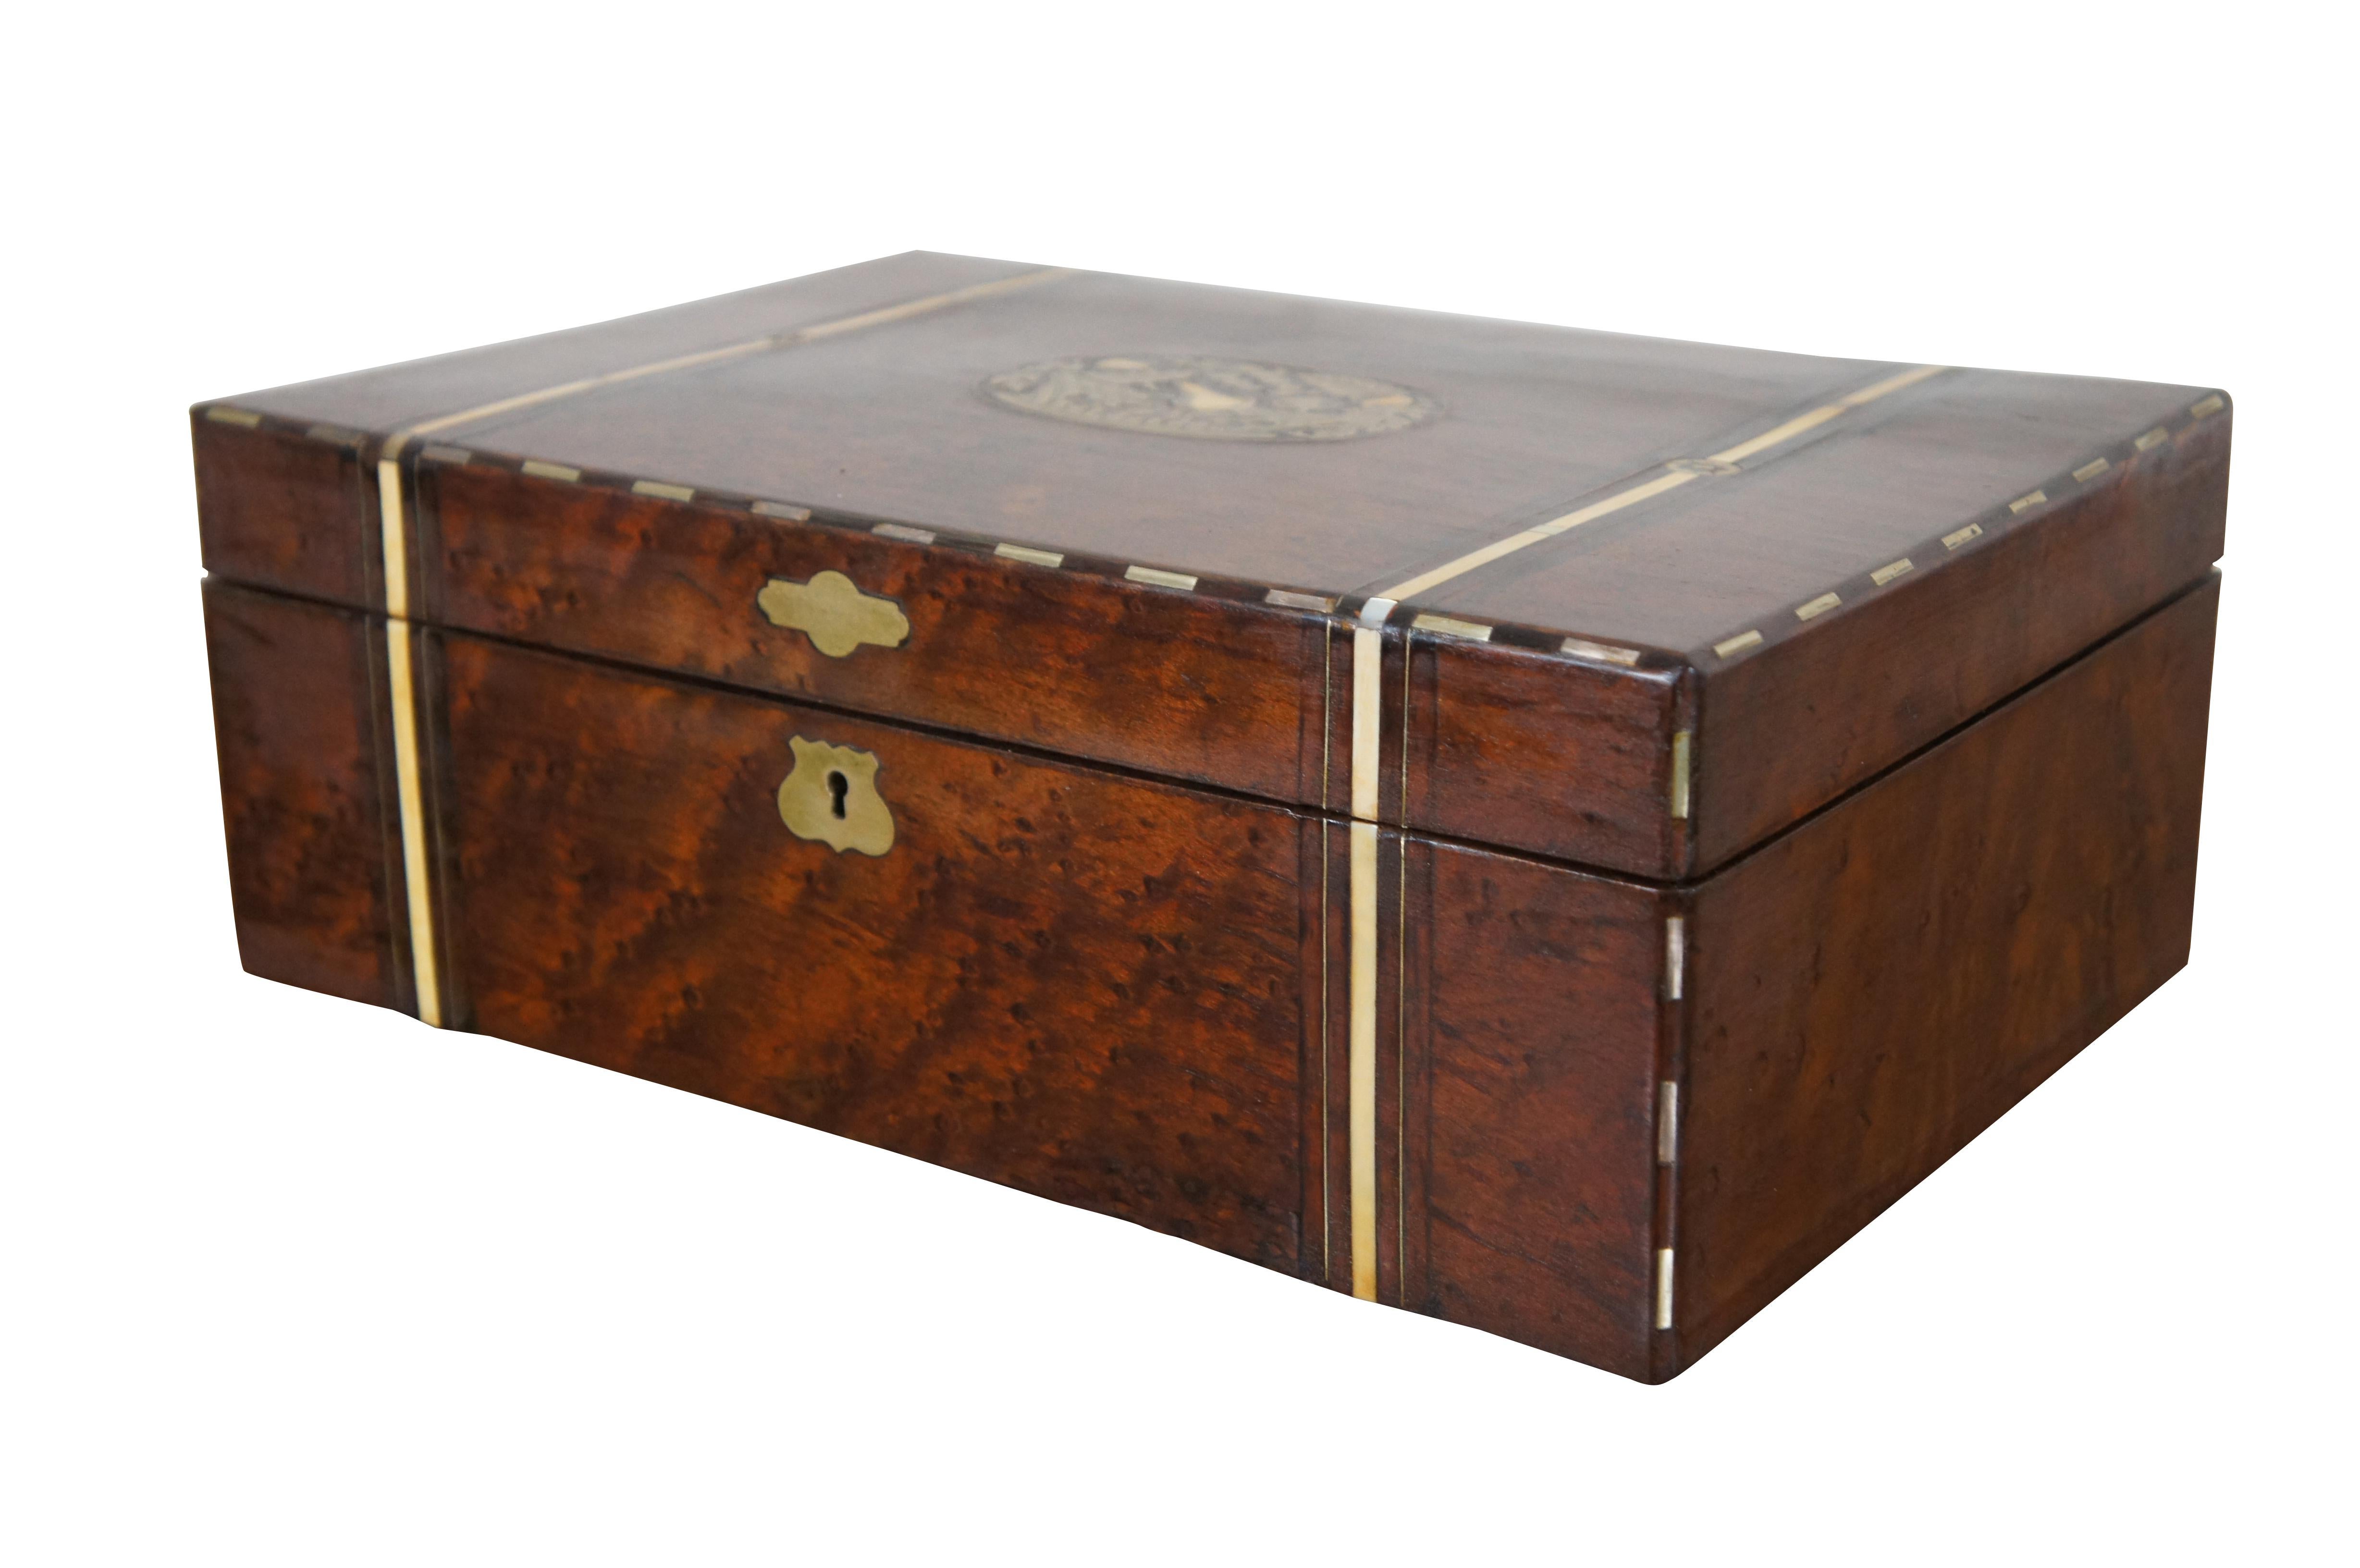 A superb antique 19th century English Victorian burled walnut travel campaign vanity box featuring inlaid brass fruit basket motif with mother of pearl banded accents.  The chest opens to a Rosewood framed mirror that lifts for letter storage, and a